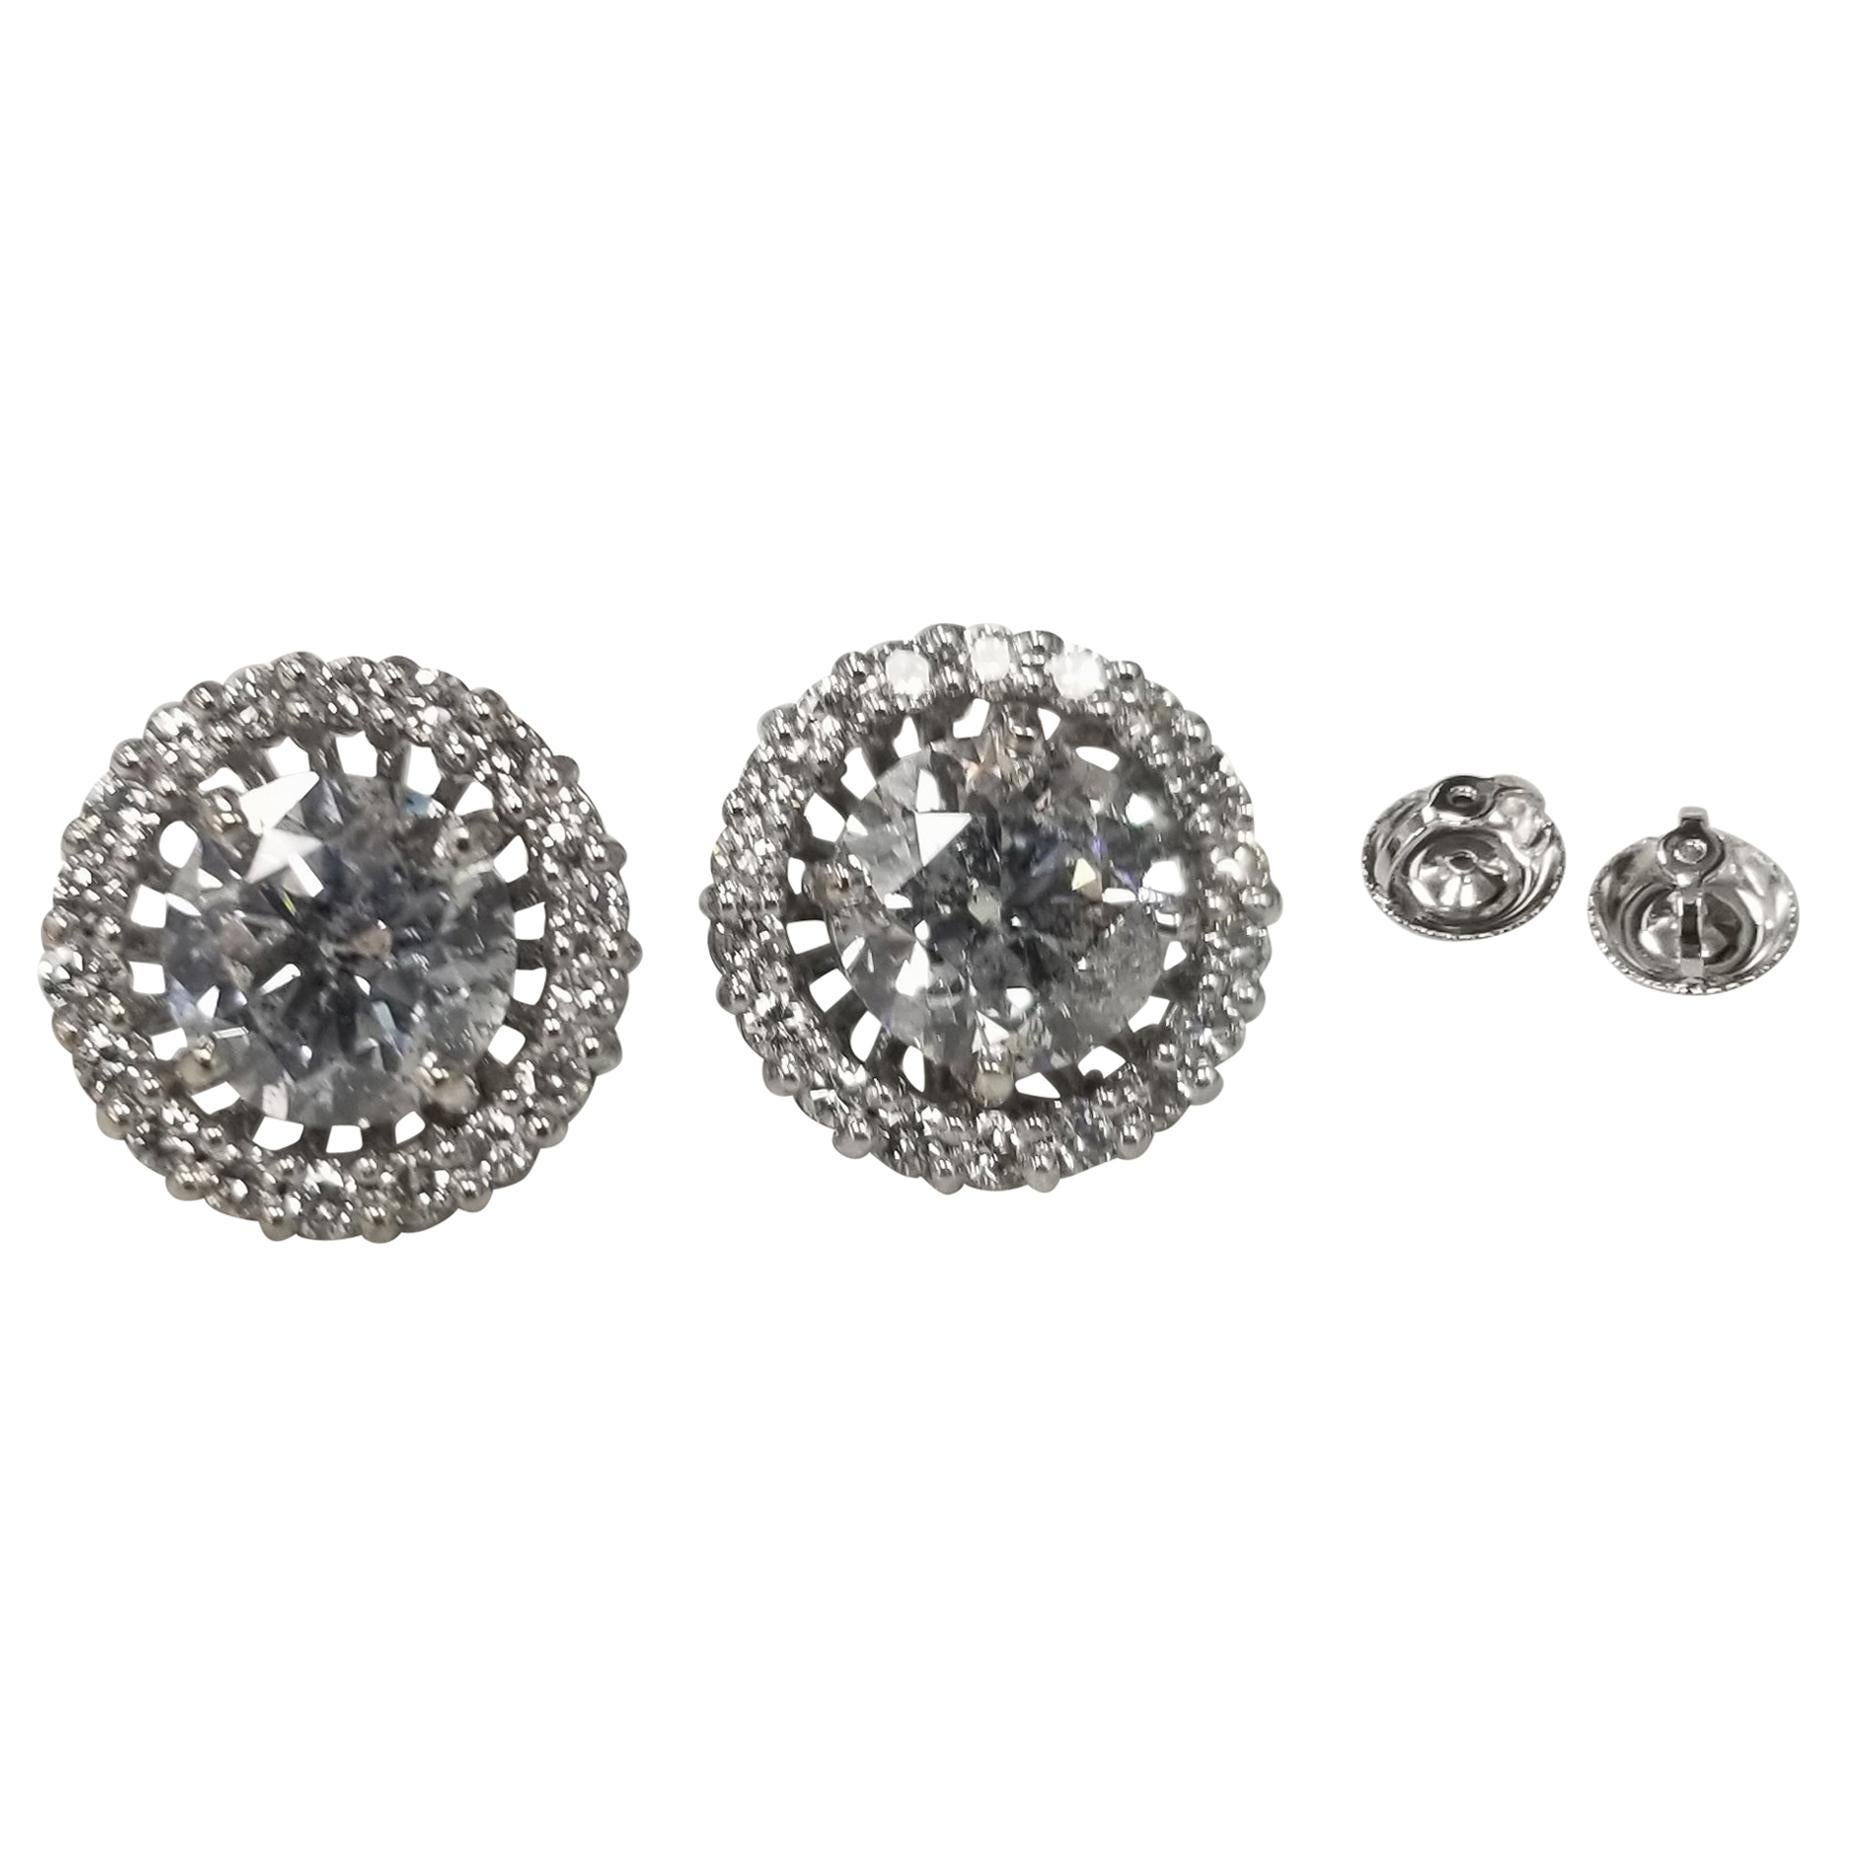 Diamond Studs with Jackets Color "G", Clarity SI3-I1 and Weight 3.15 Carat